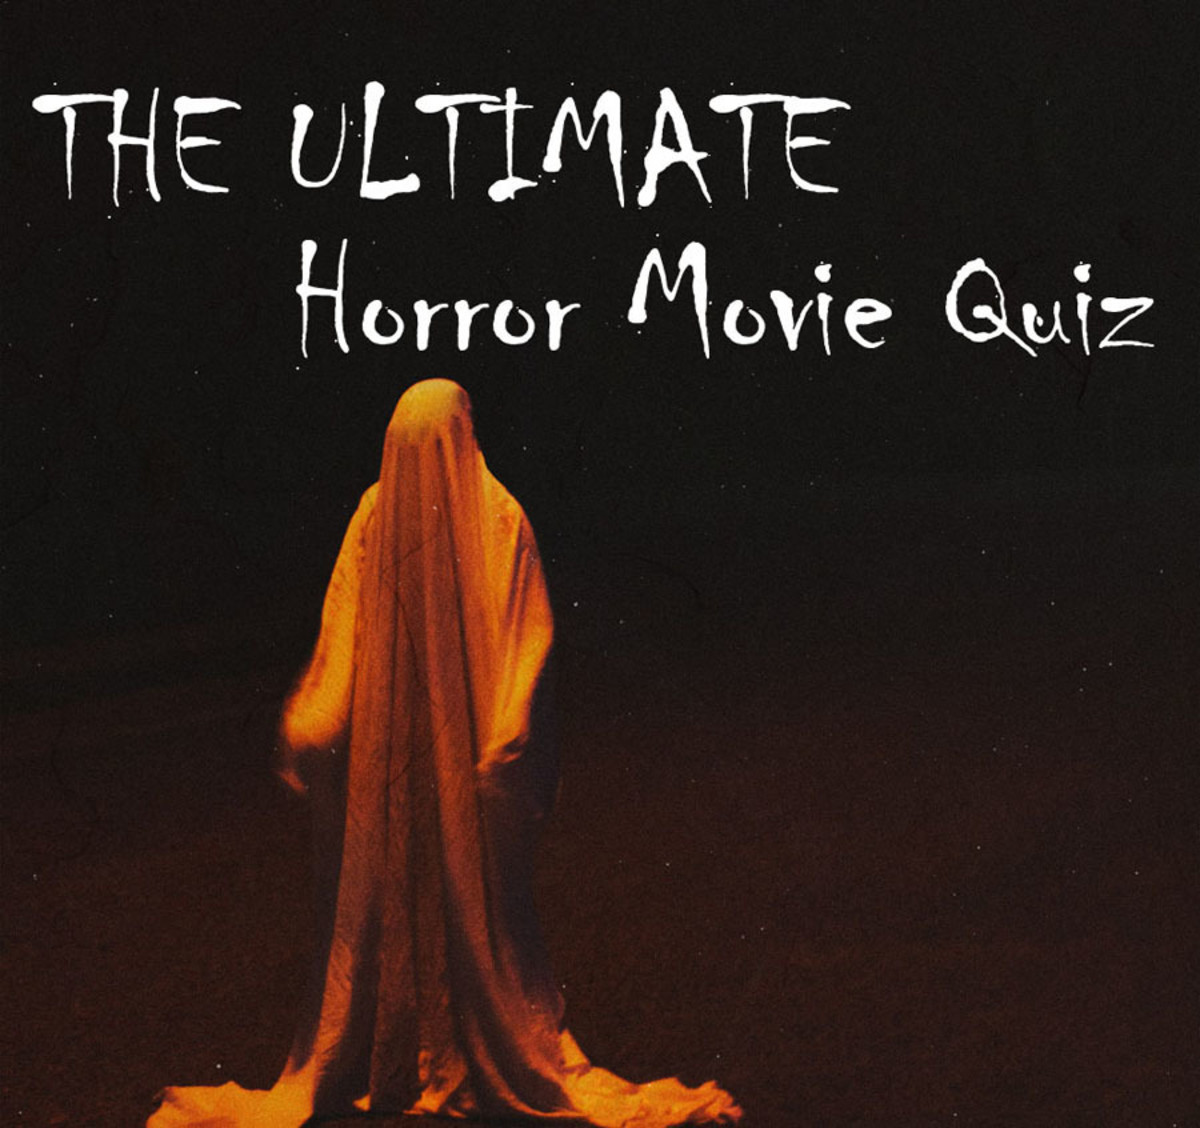 A Horror Movie Quiz to Stump the Biggest Fan